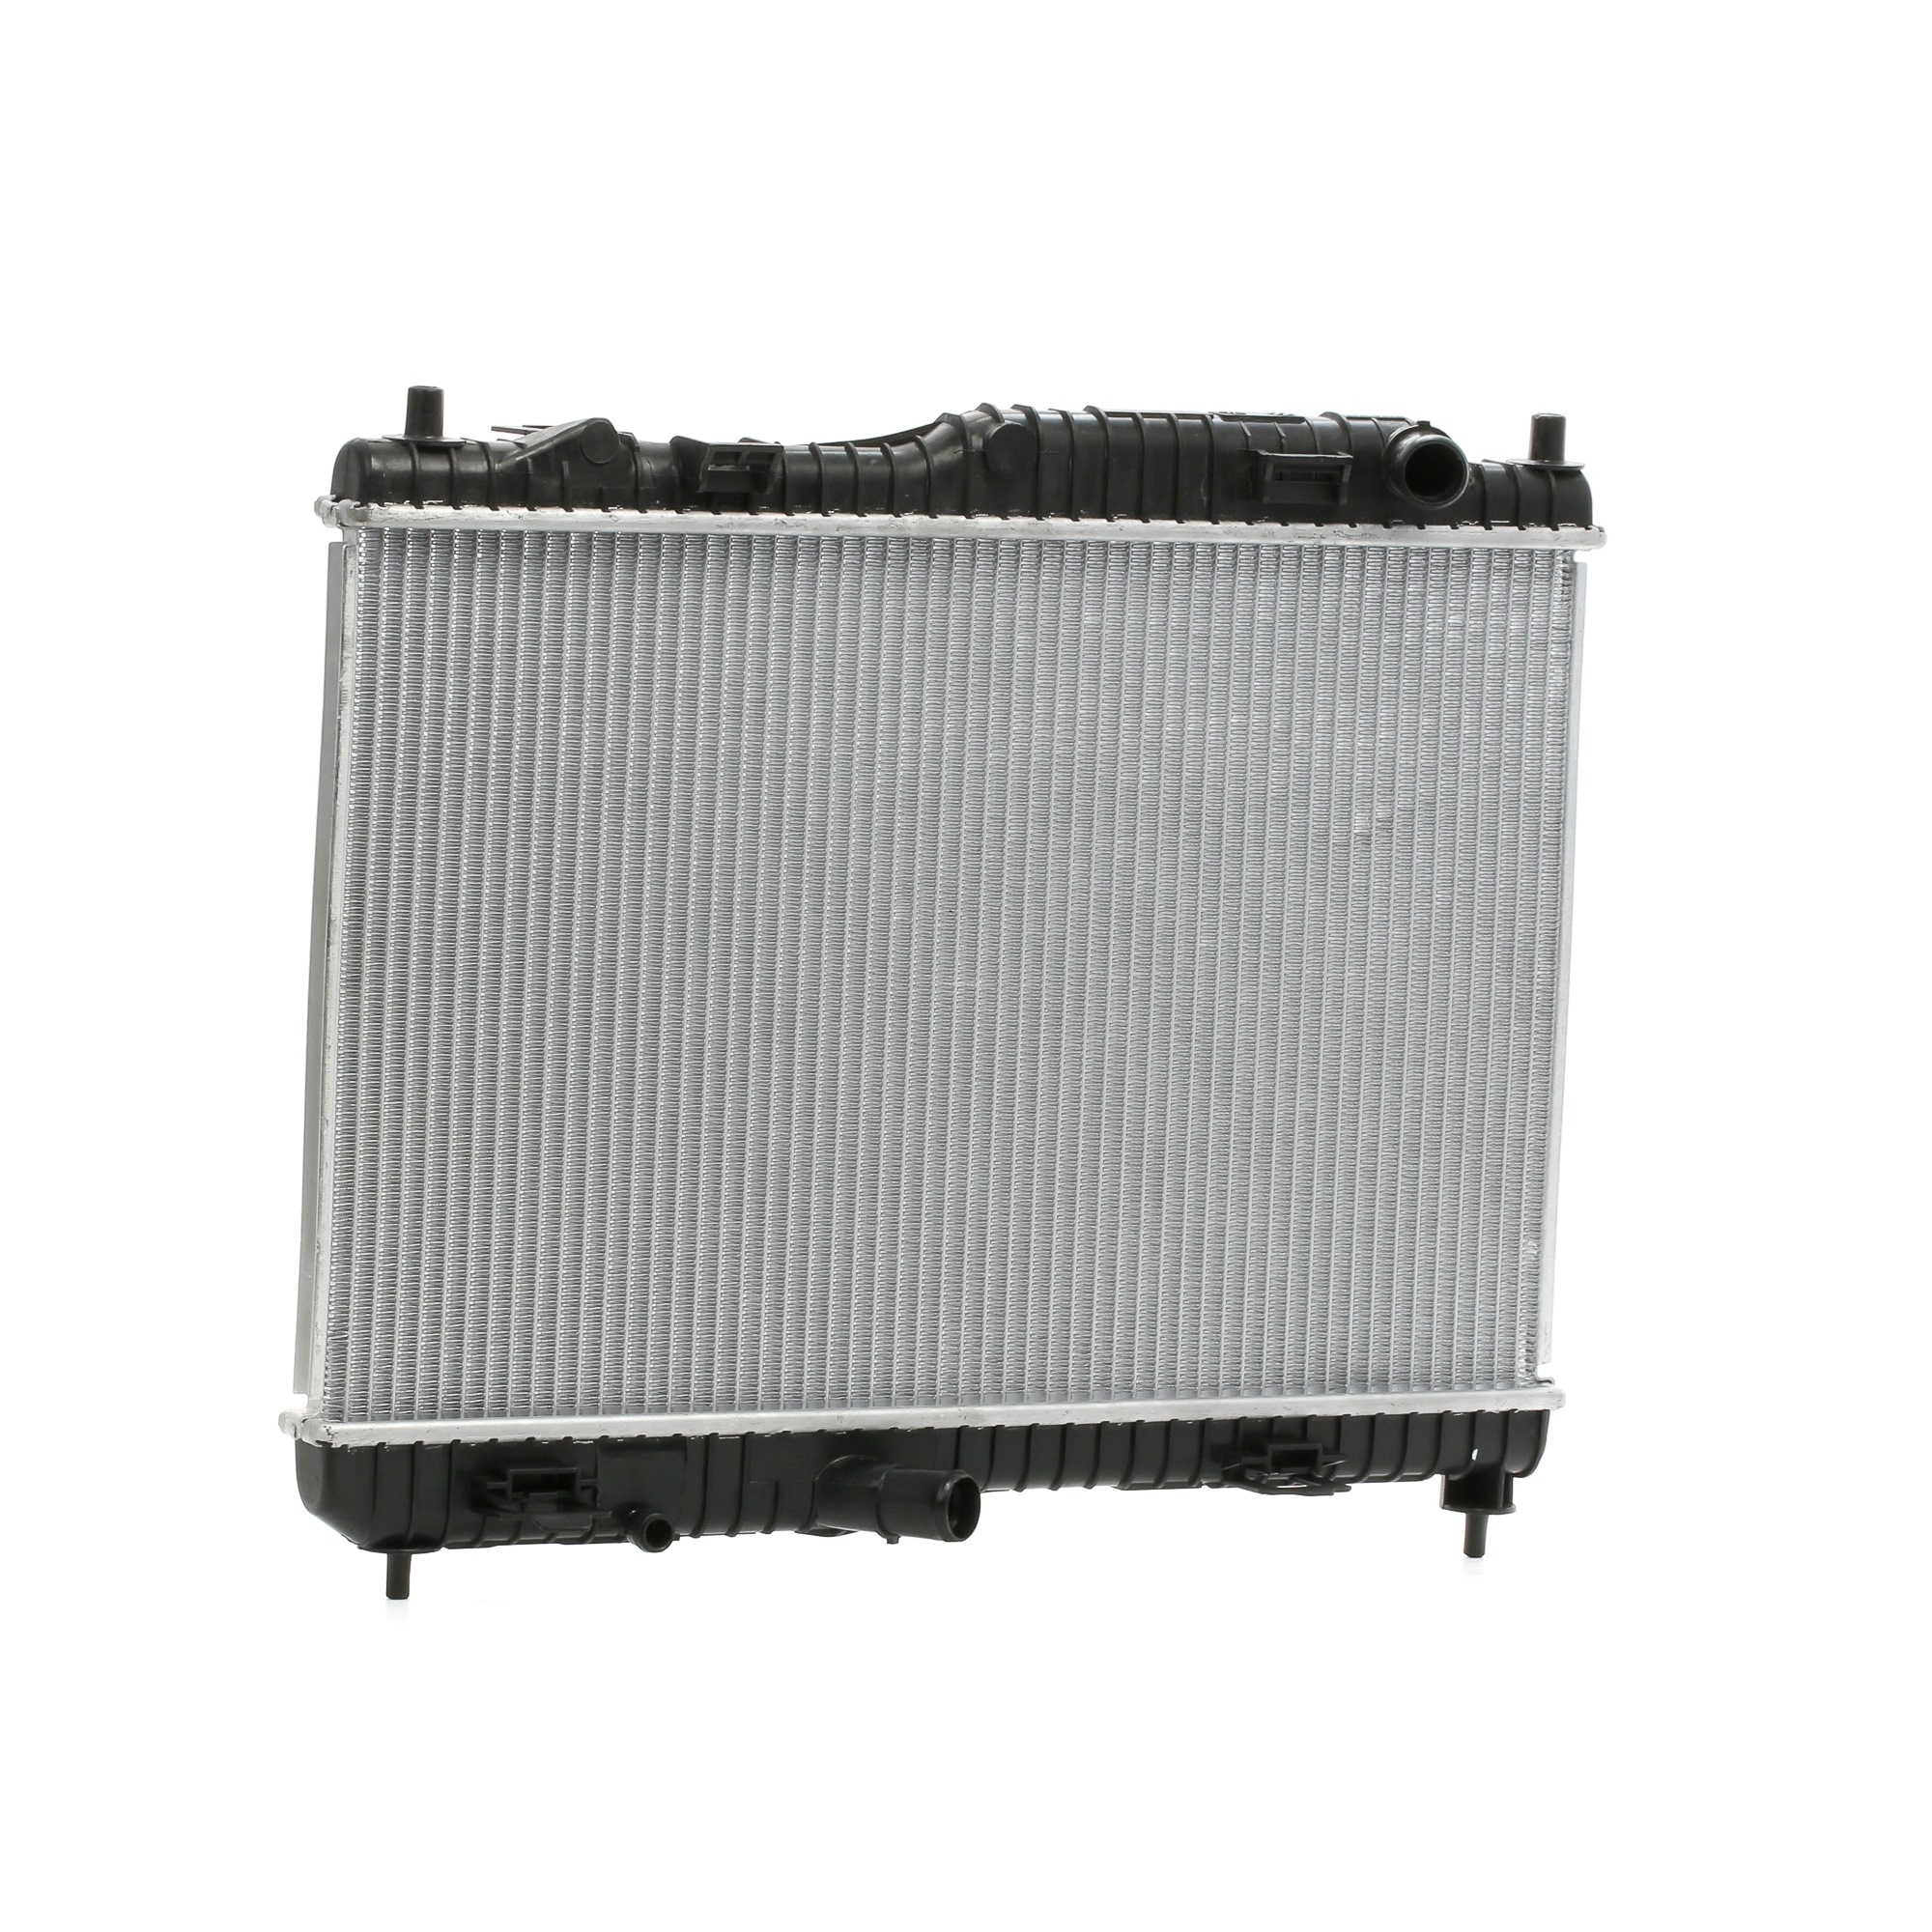 STARK SKRD-0120809 Engine radiator Aluminium, for vehicles with/without air conditioning, Manual Transmission